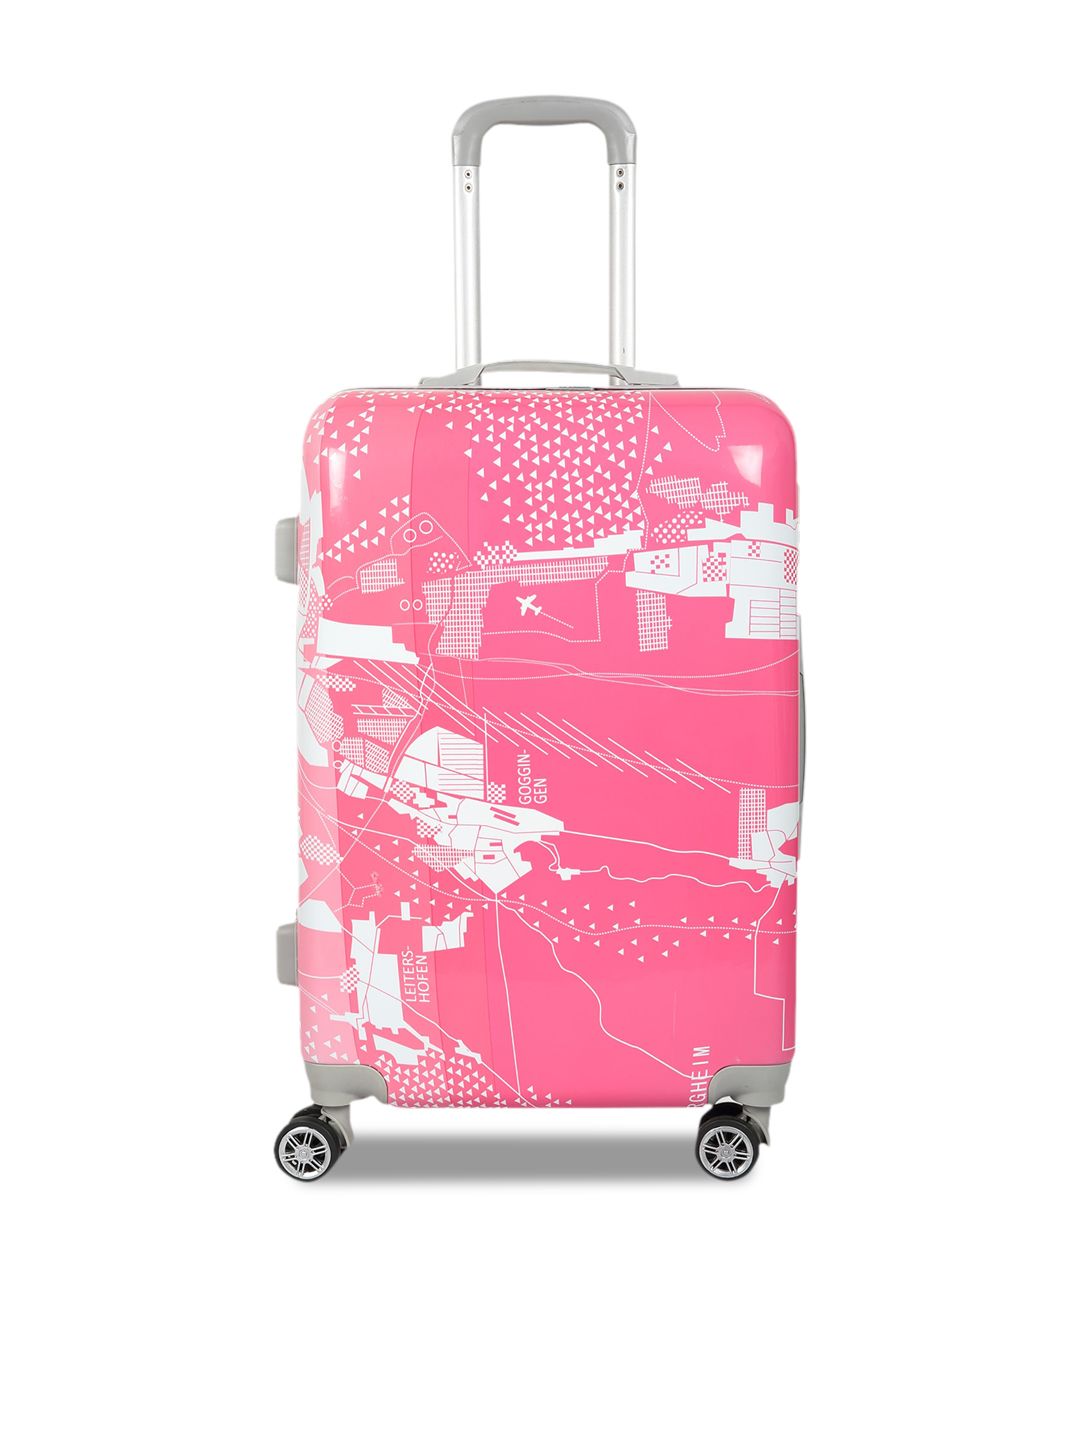 Polo Class Pink & White Printed Hard-Sided Medium Trolley Suitcase Price in India